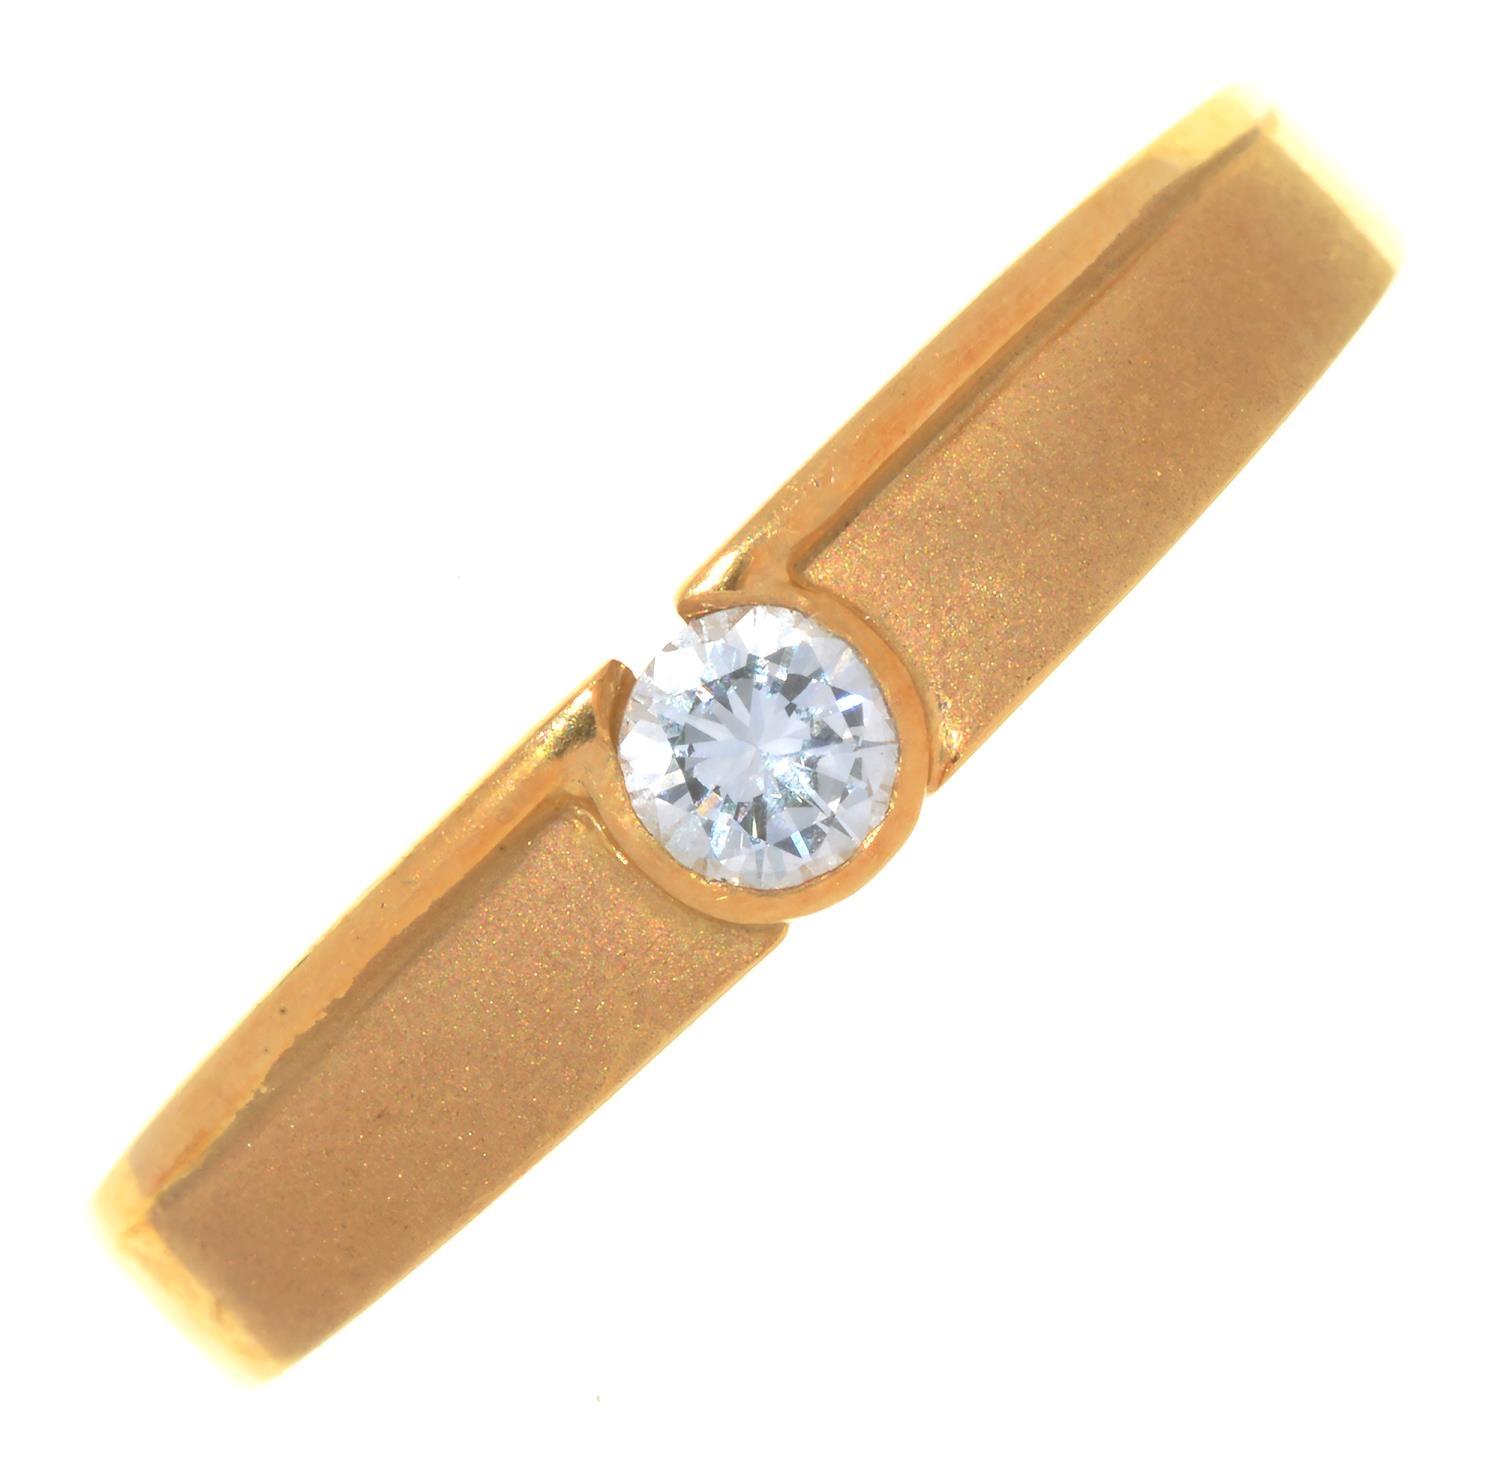 A DIAMOND SOLITAIRE RING IN GOLD MARKED 750, 4.5G, SIZE V½